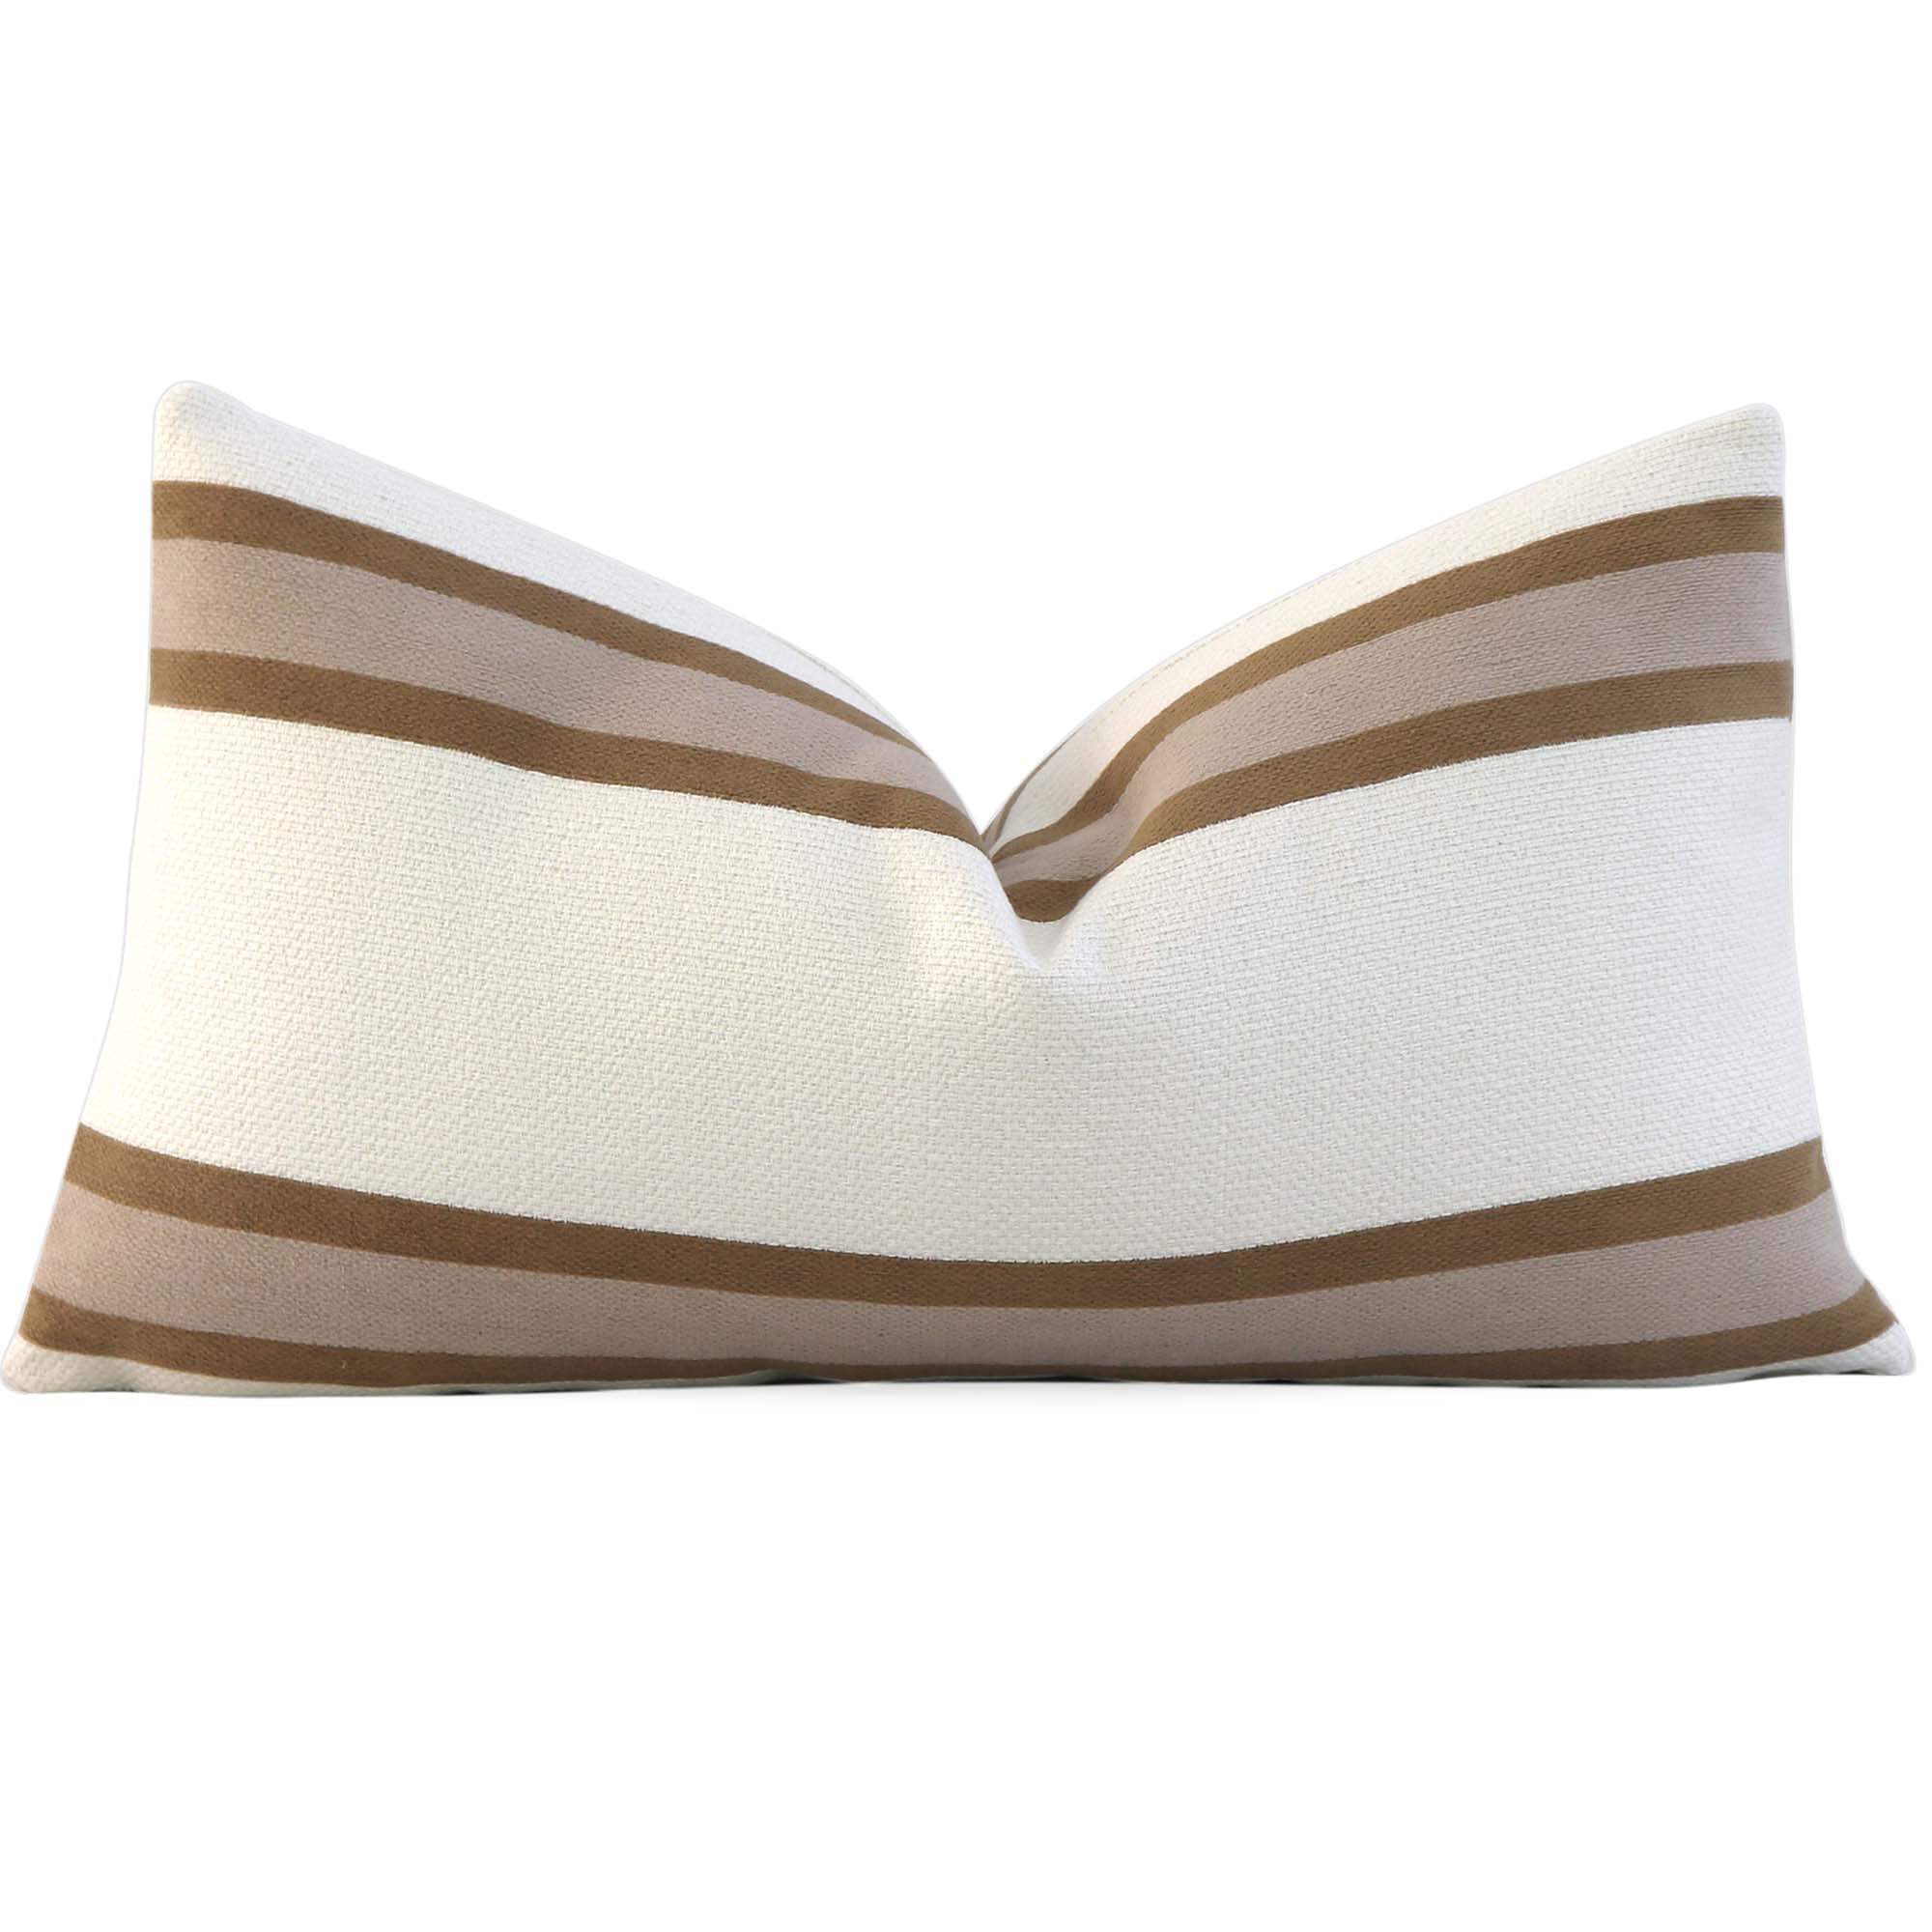 Striped Simpatico Terracotta Throw Pillow Cover by Chloe & Olive